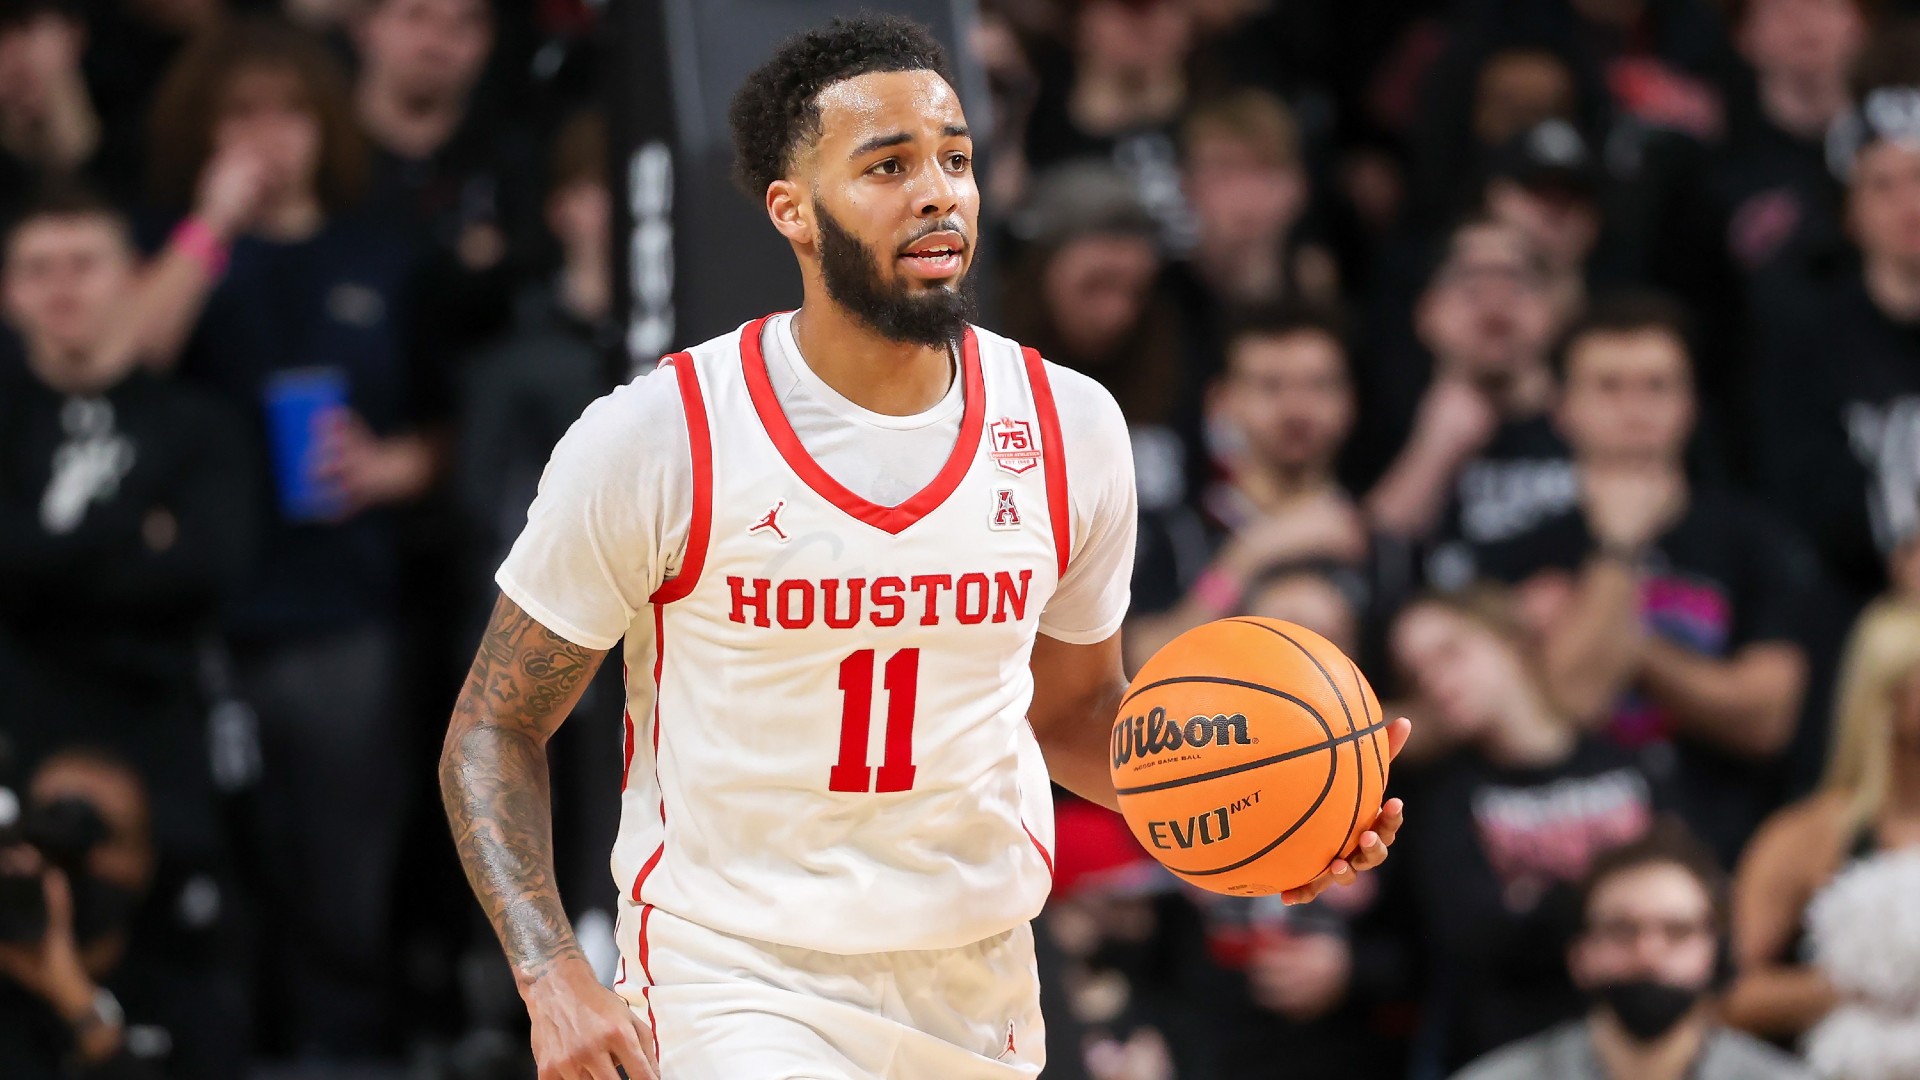 Wednesday College Basketball Odds, Picks, Predictions: Houston vs. SMU Betting Preview article feature image